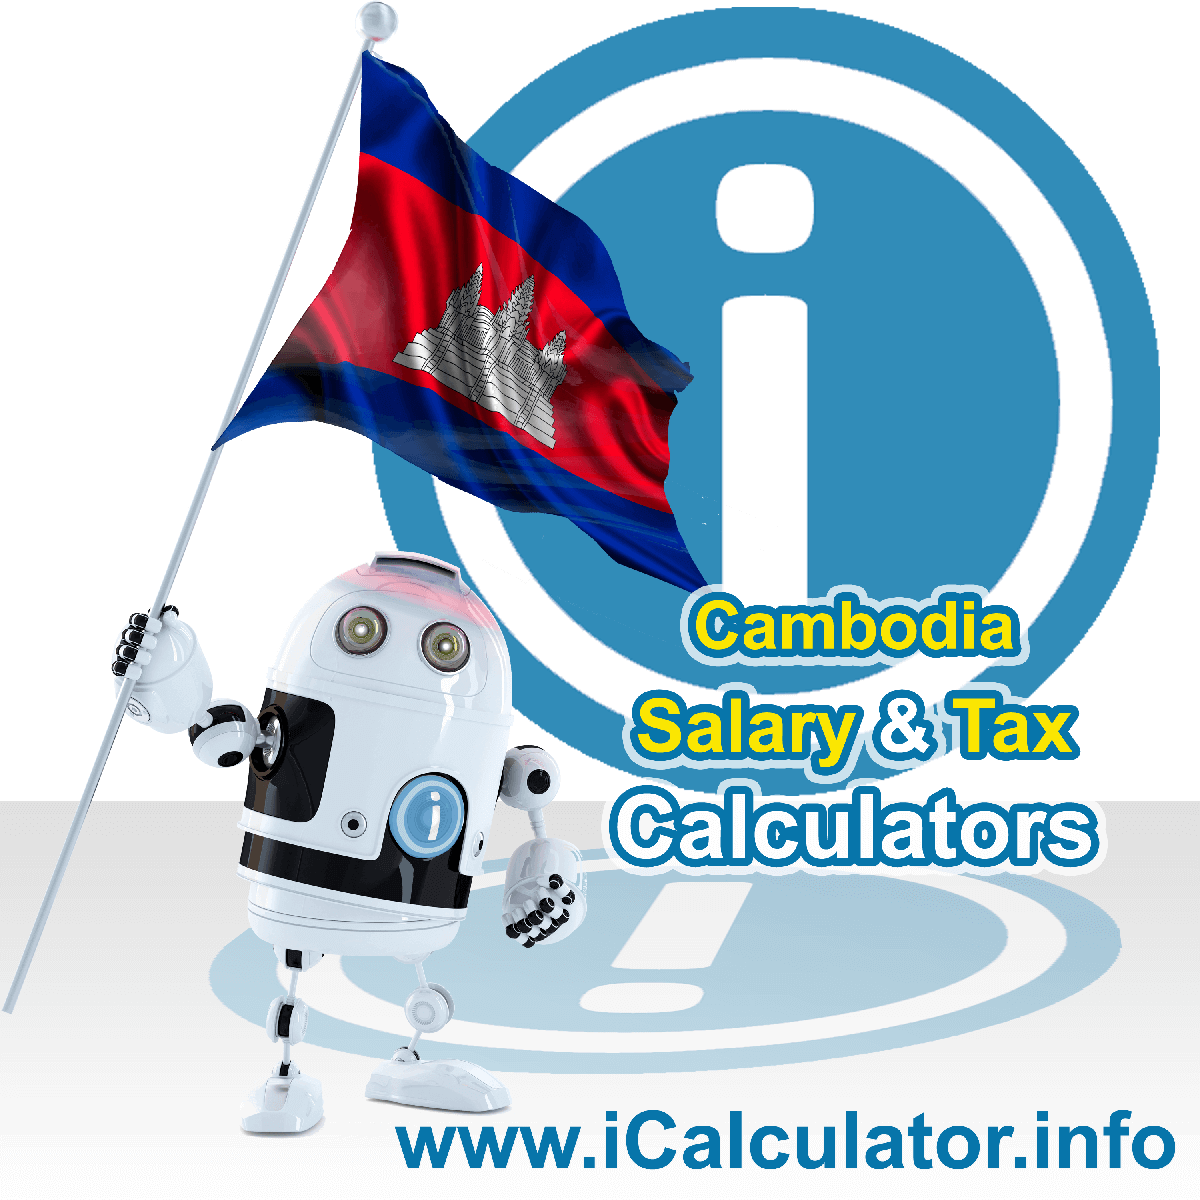 Cambodia Wage Calculator. This image shows the Cambodia flag and information relating to the tax formula for the Cambodia Tax Calculator